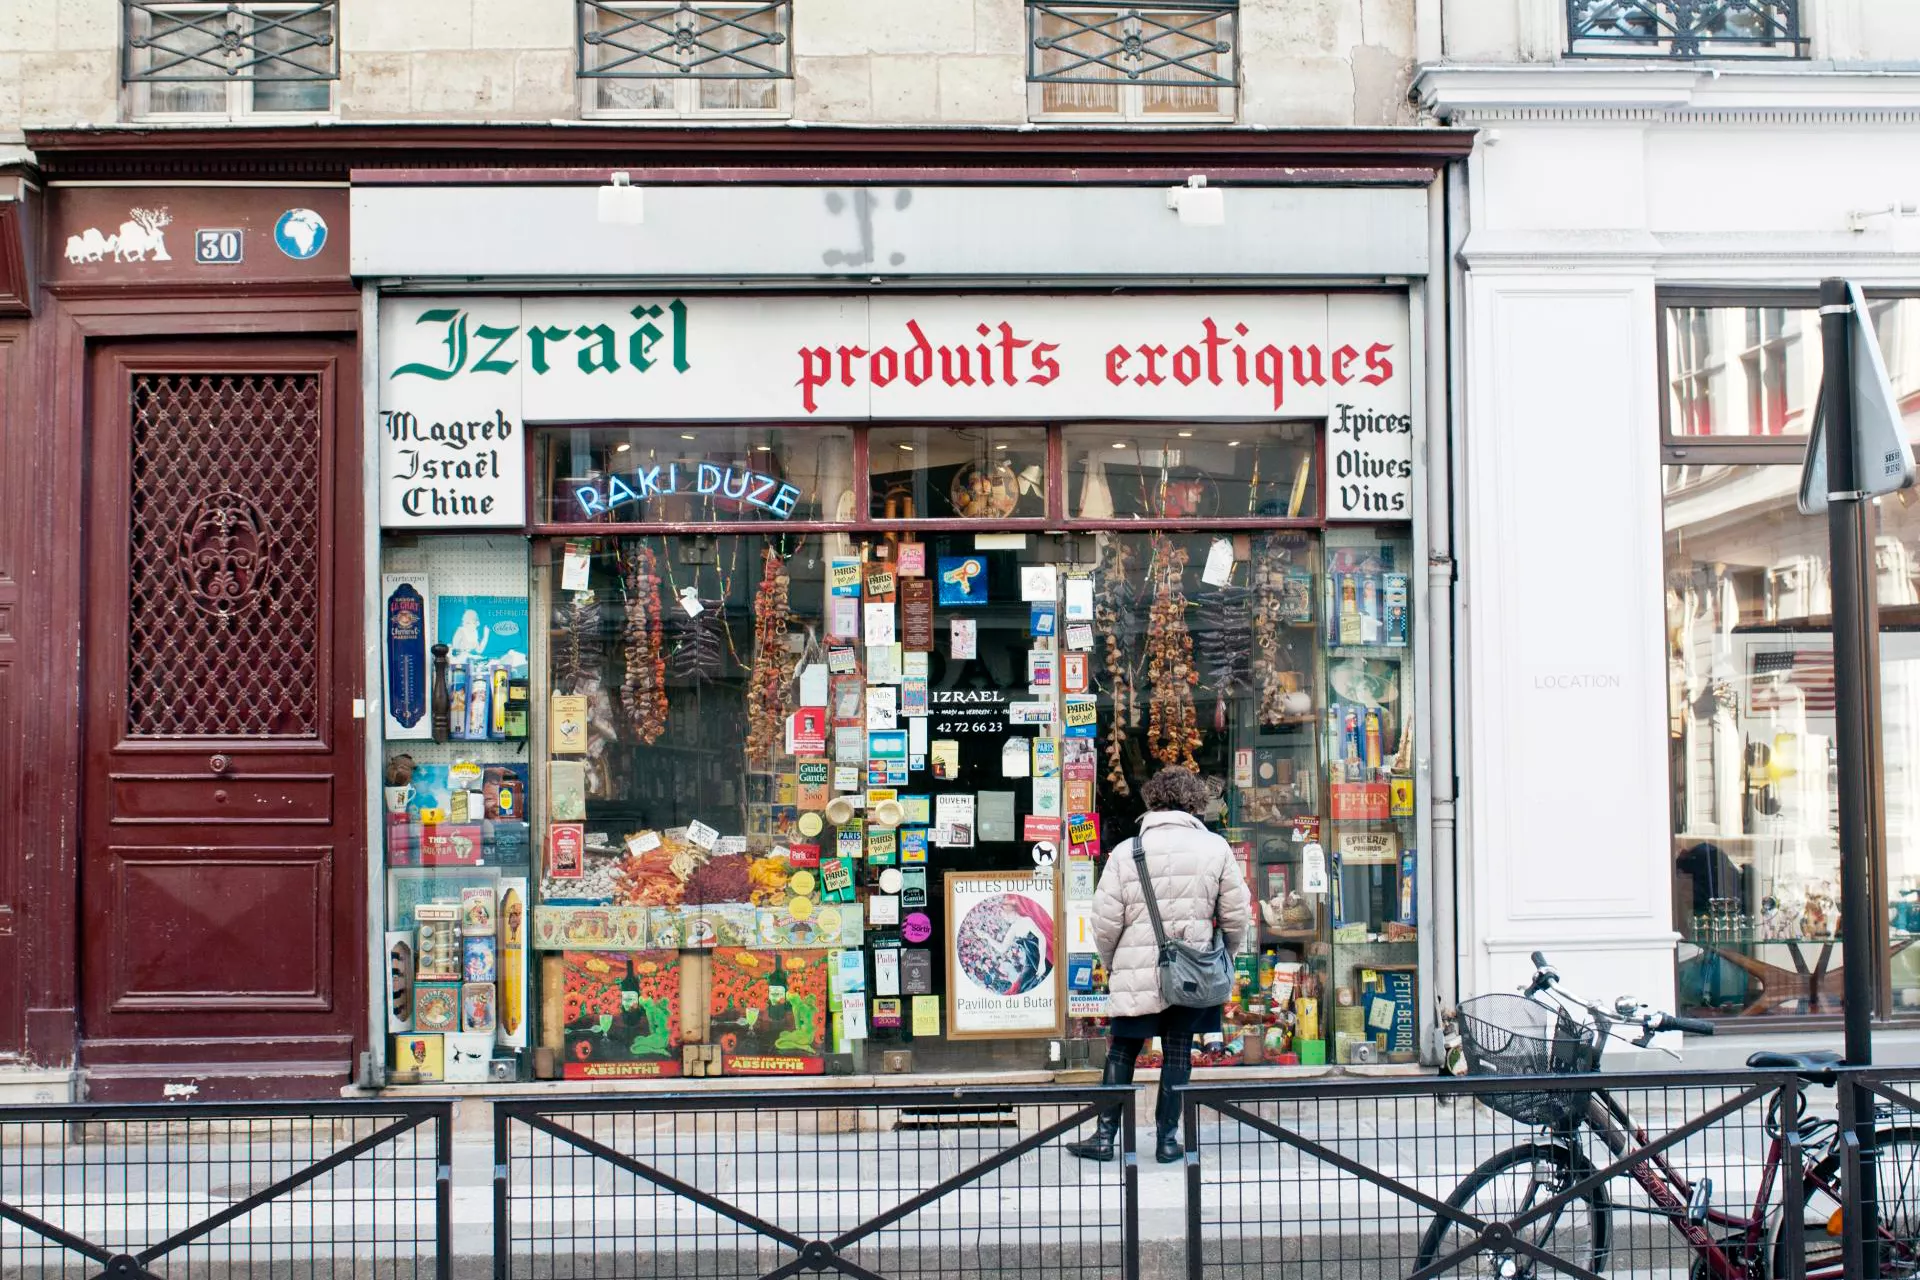 Izrael in France, europe | Spices - Country Helper